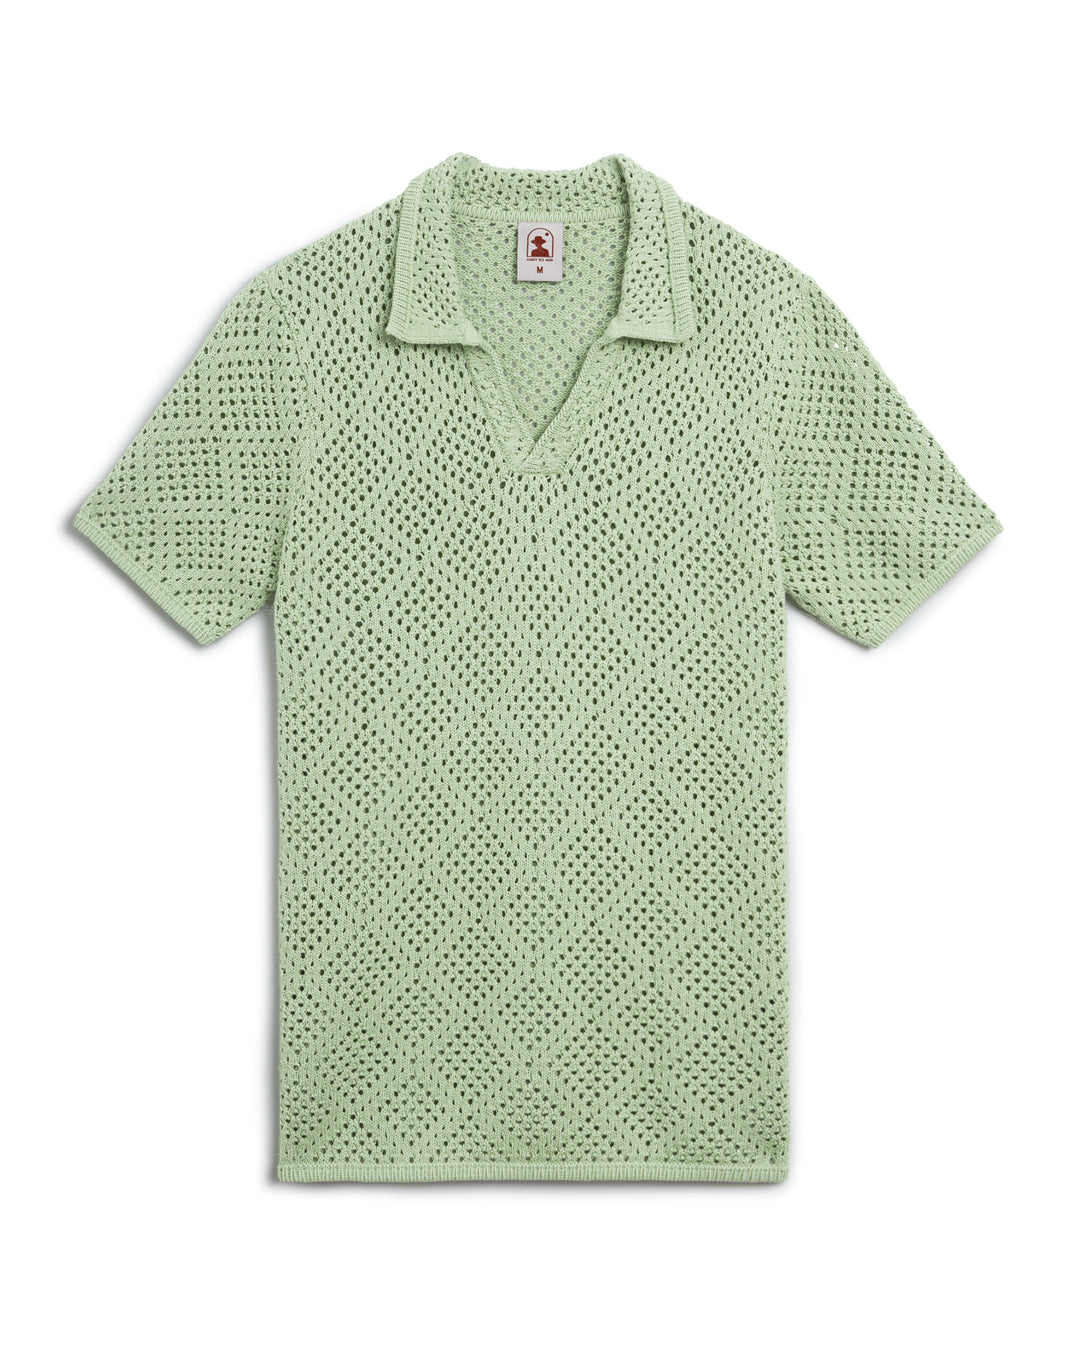 An Antibes Crochet Shirt - Pistachio, hand-crocheted, reminiscent of the vibrant greens found in the French Riviera by Dandy Del Mar.